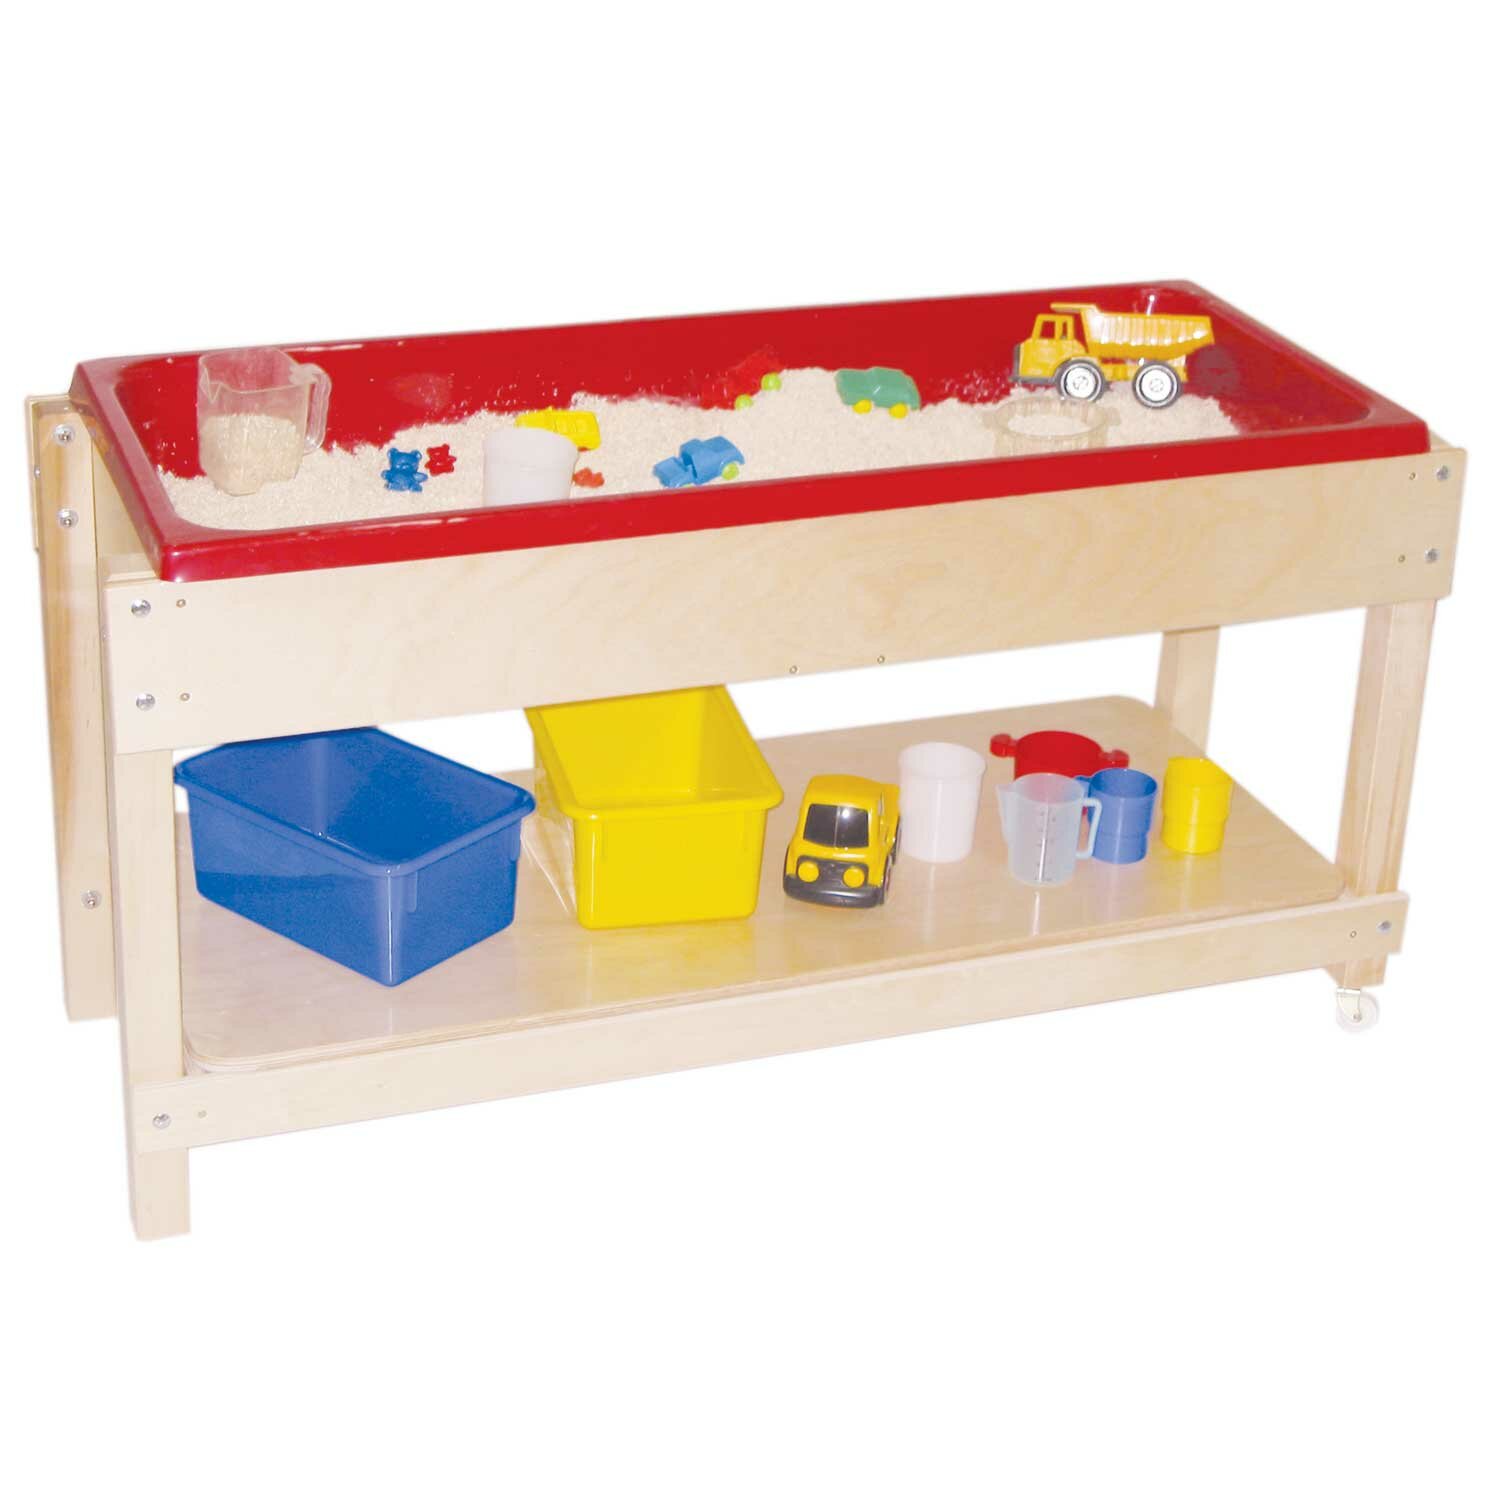 fisher price sand and water table